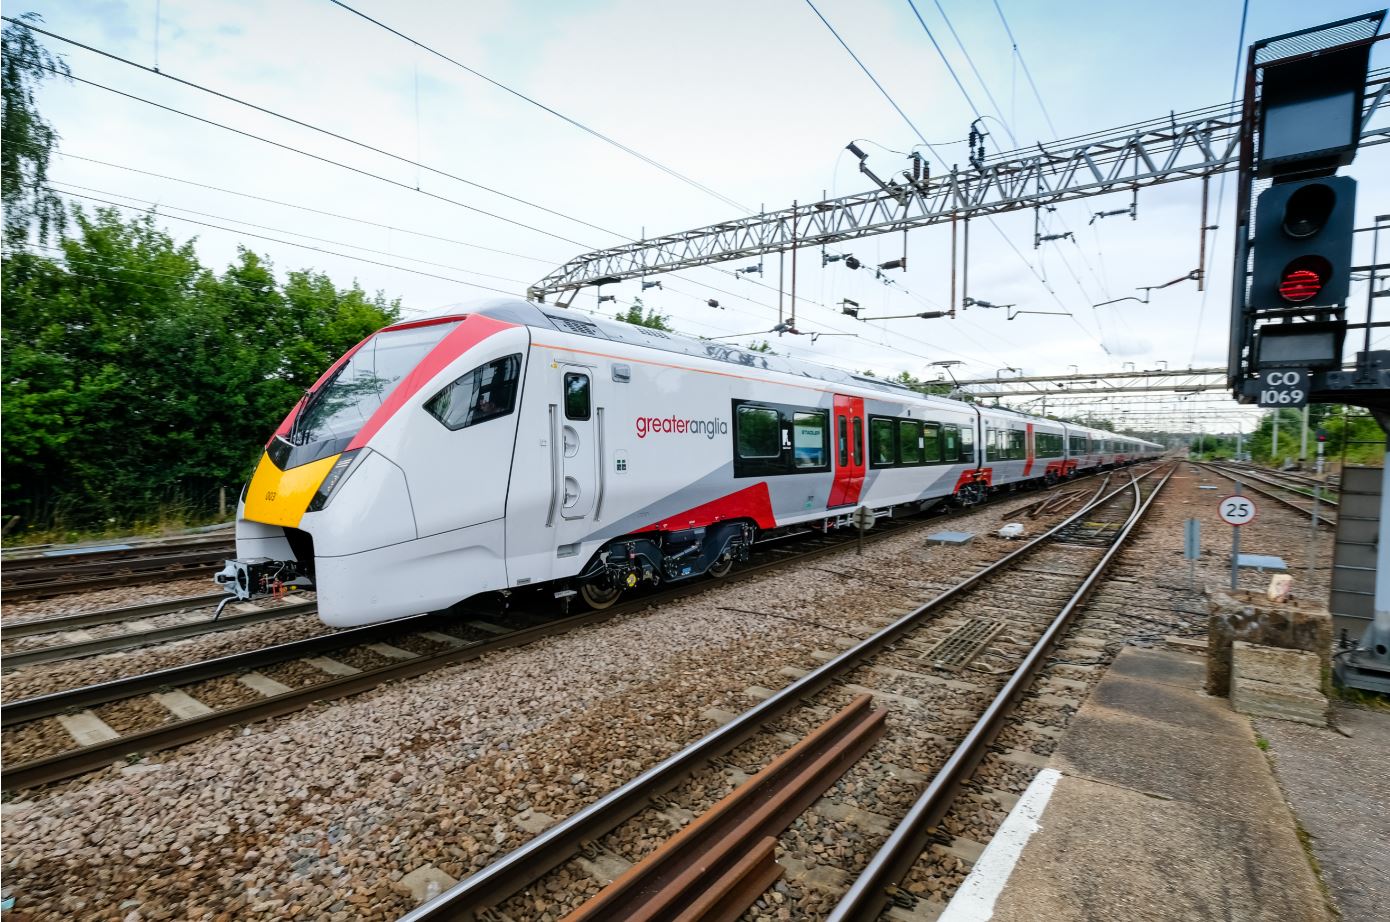 Stadler Greater Anglia Intercity train on test at Colchester